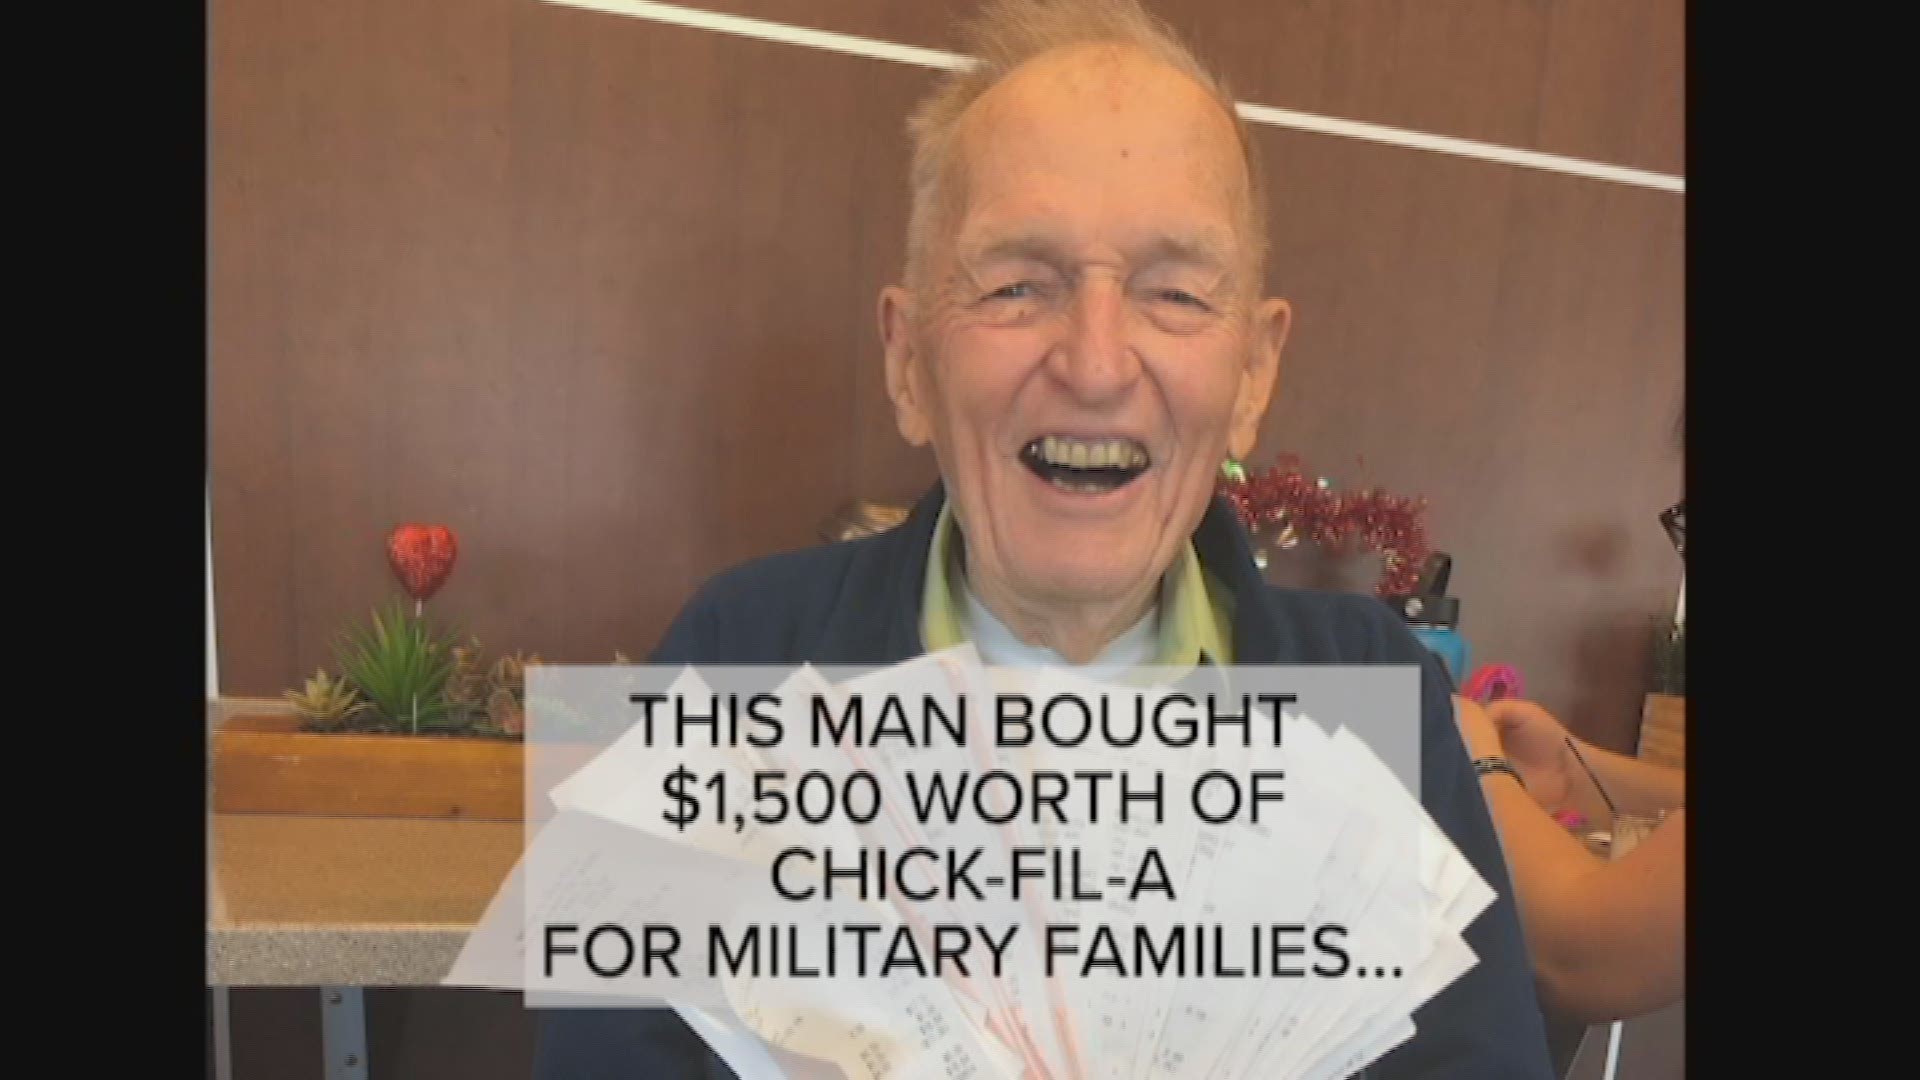 A California man turning 92 wanted to celebrate his birthday by giving back to military families.